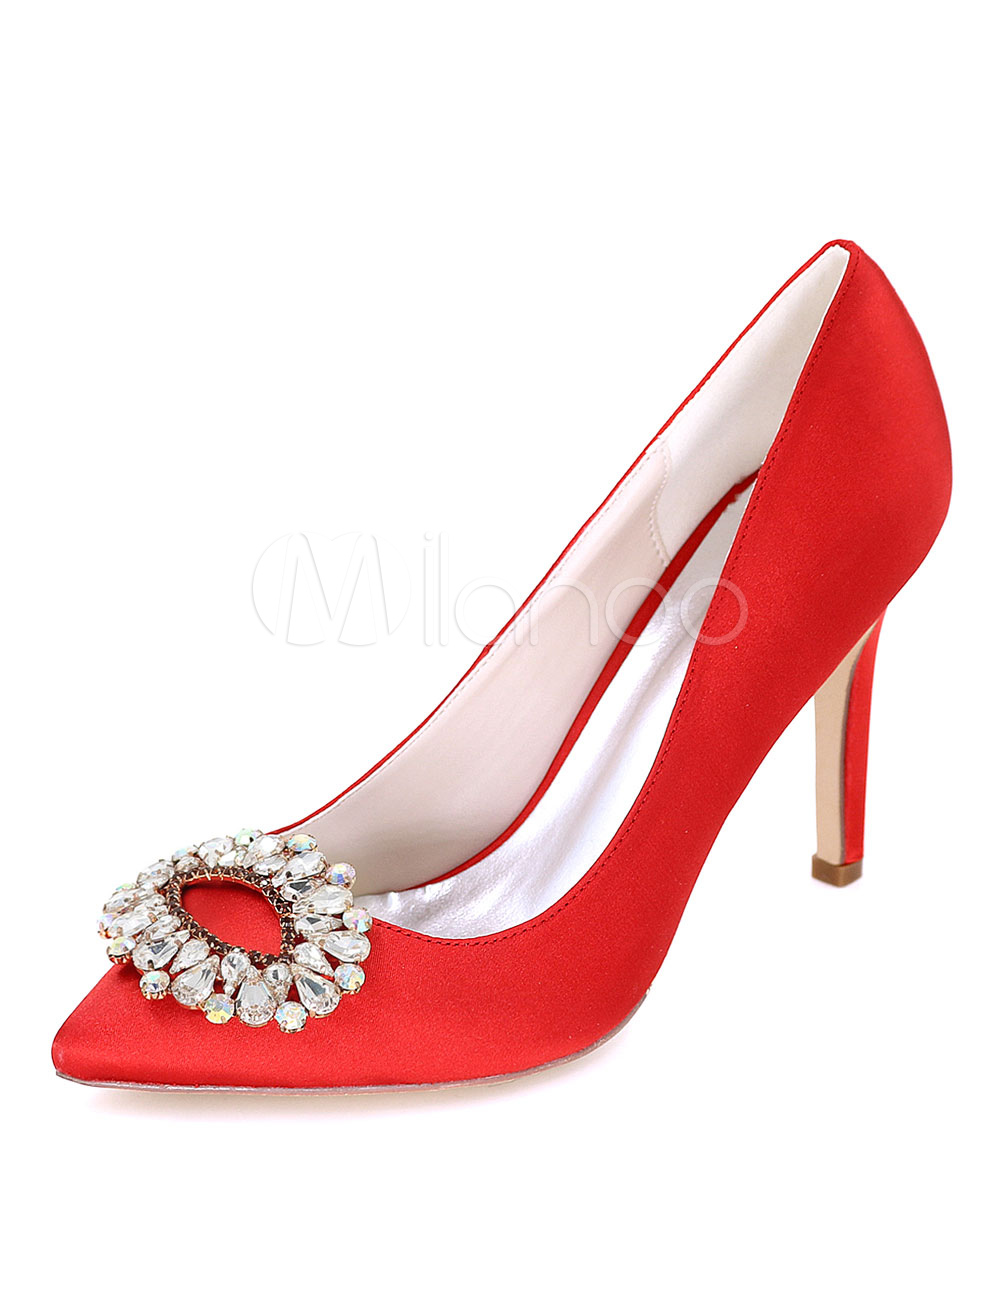 Red Wedding Shoes Women Dress Shoes Satin Pointed Toe Rhinestones Slip On High Heels (Bridal Shoes) photo